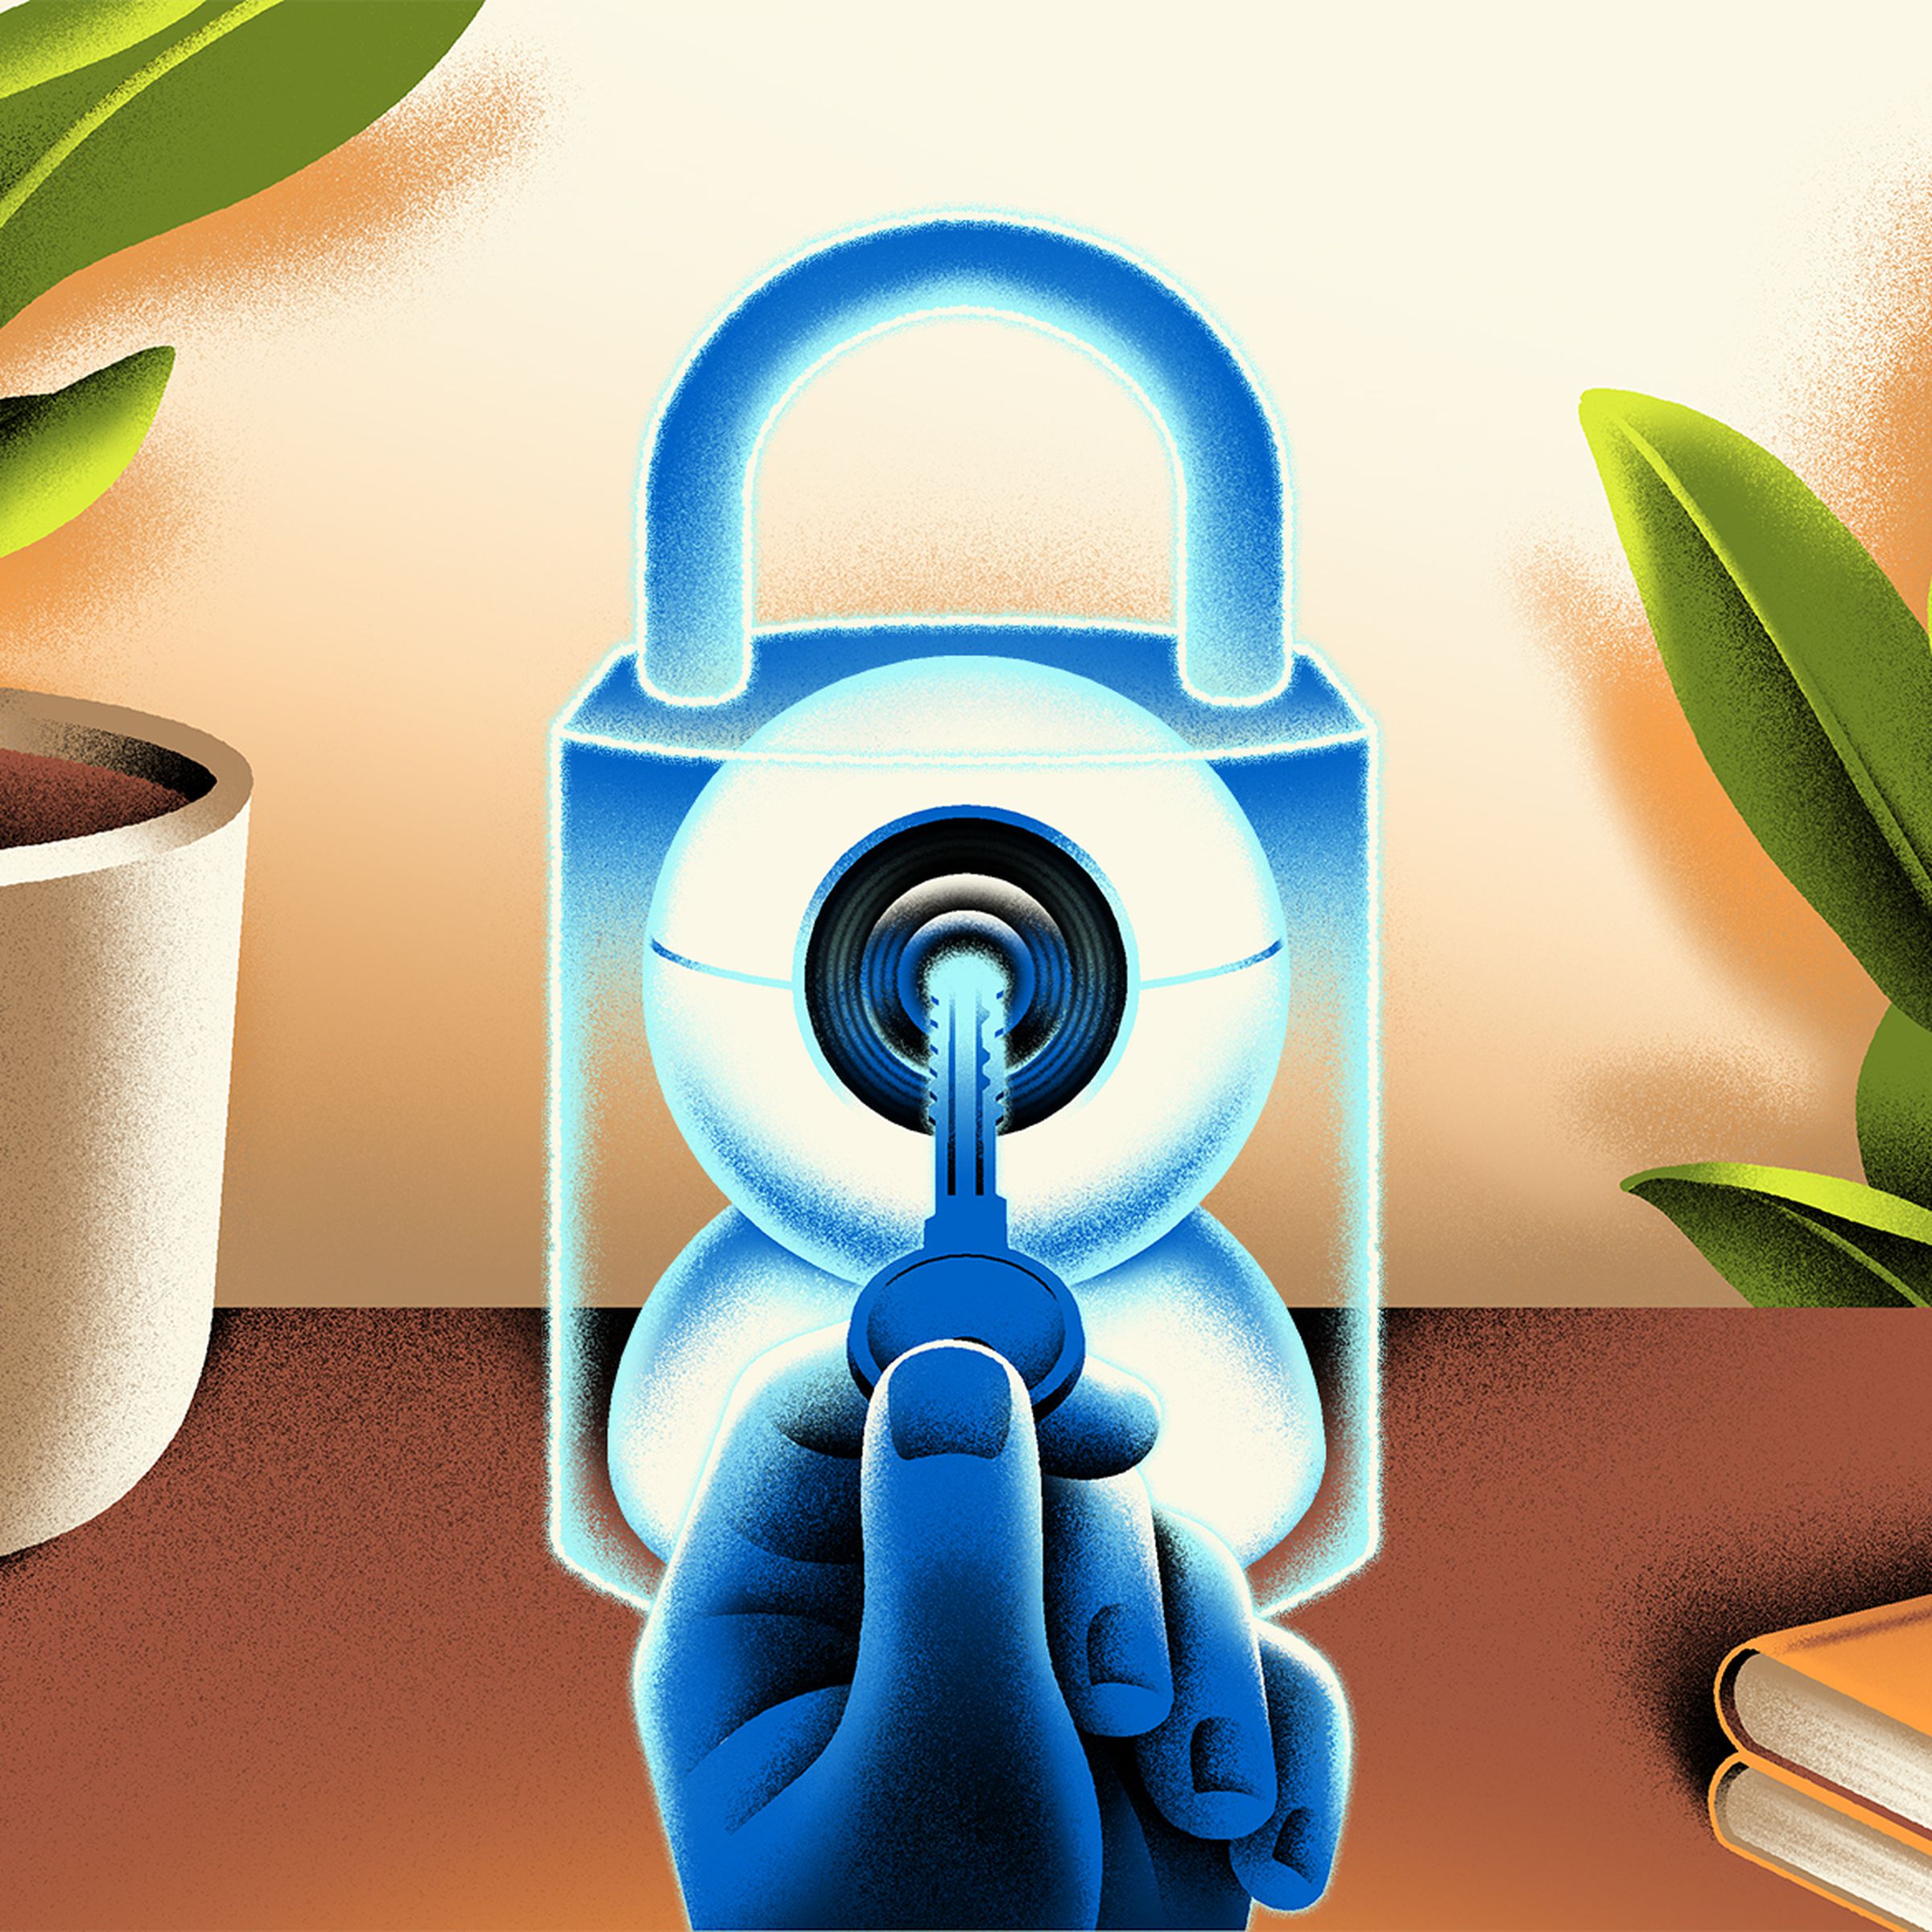 Illustration showing a security camera encased in a lock.